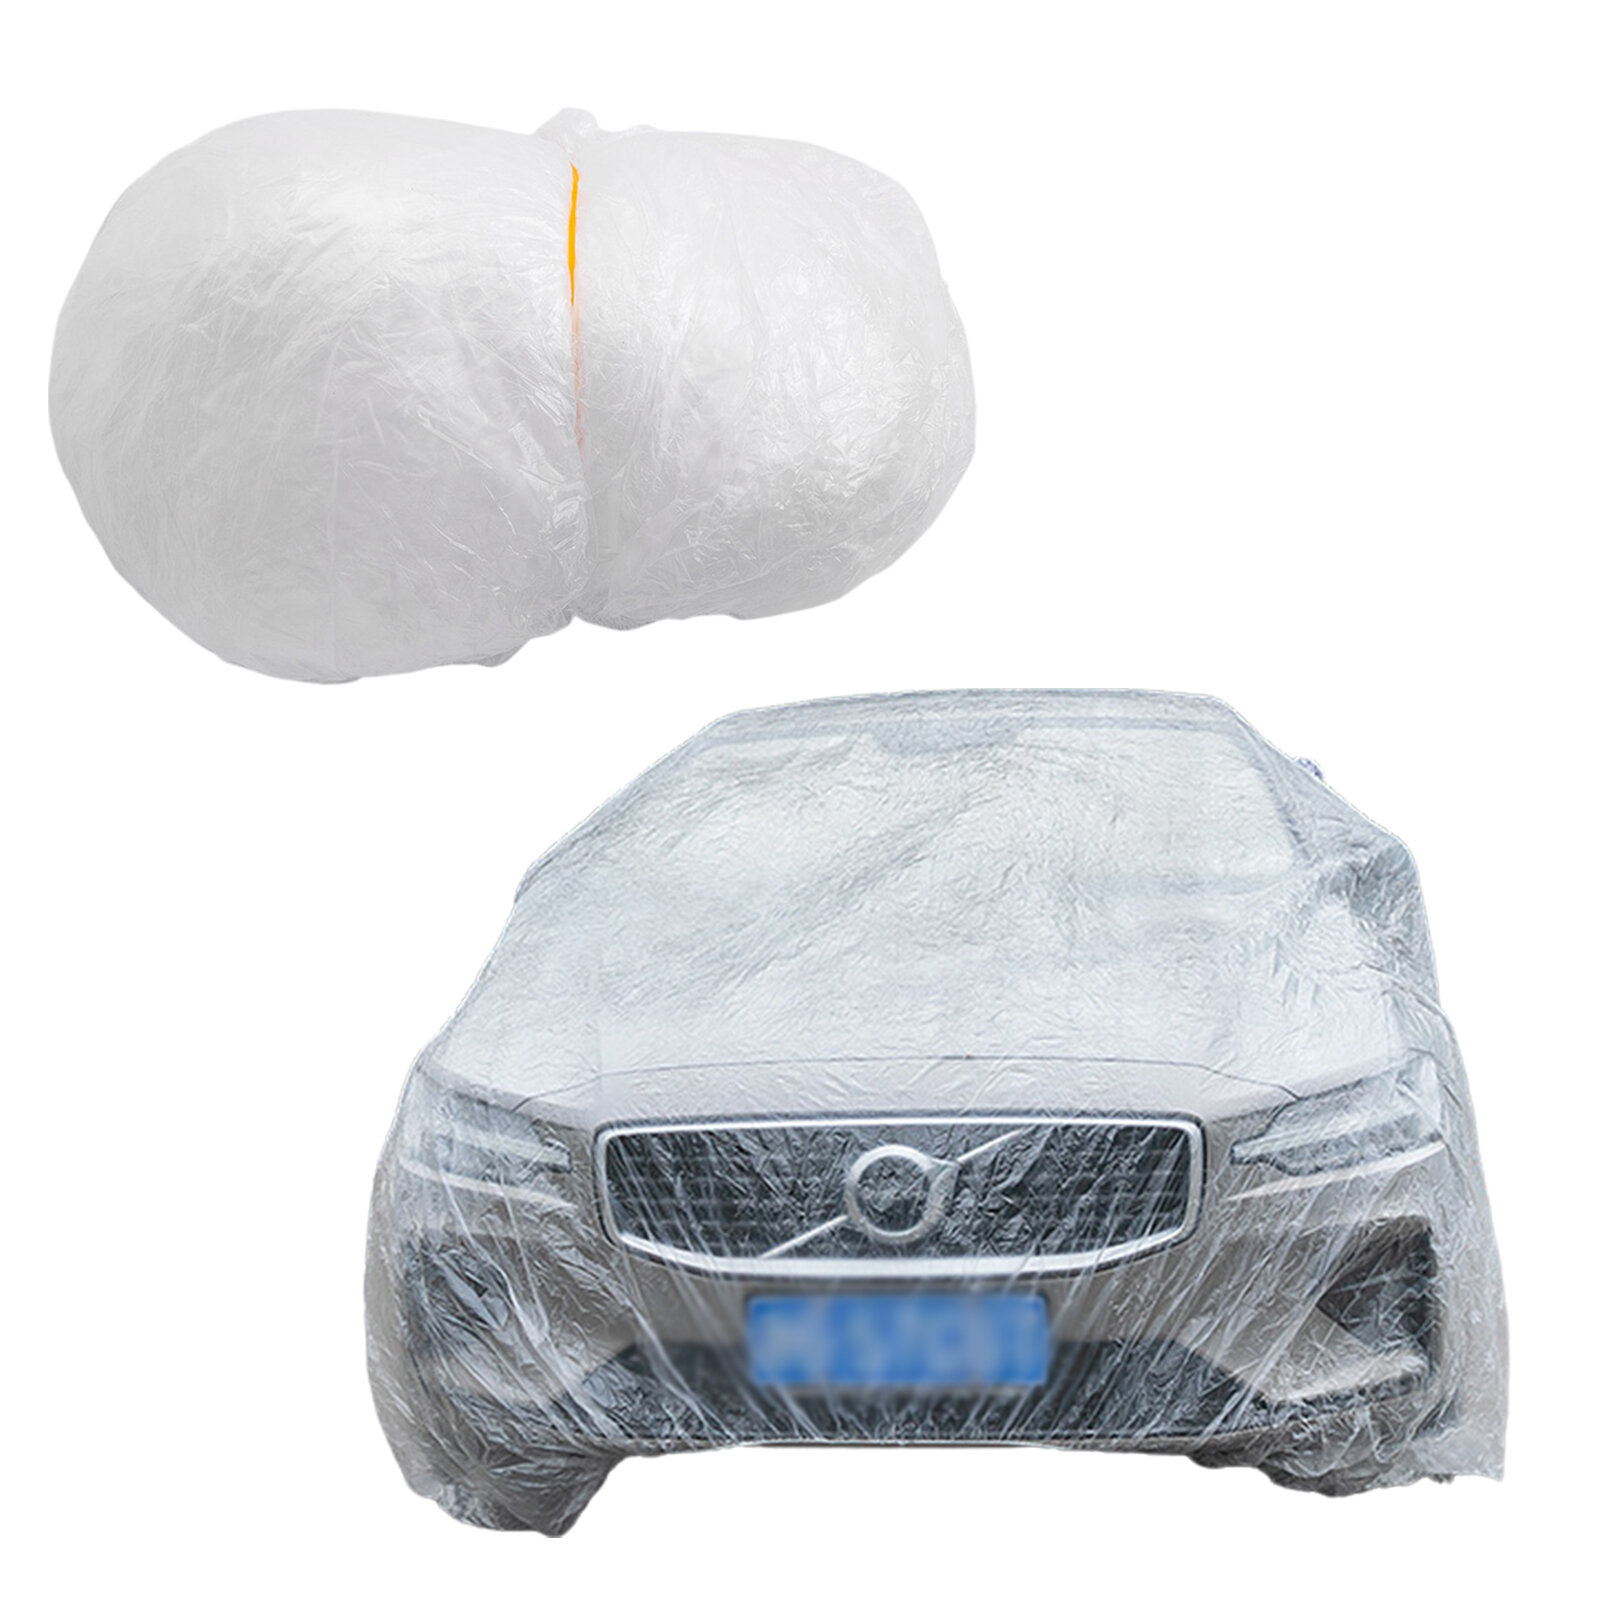 Disposable Car Cover Waterproof Dustproof Car Covers Size S-XL Transparent Plastic Car Covers With Elastic Band For SUVs Sedan